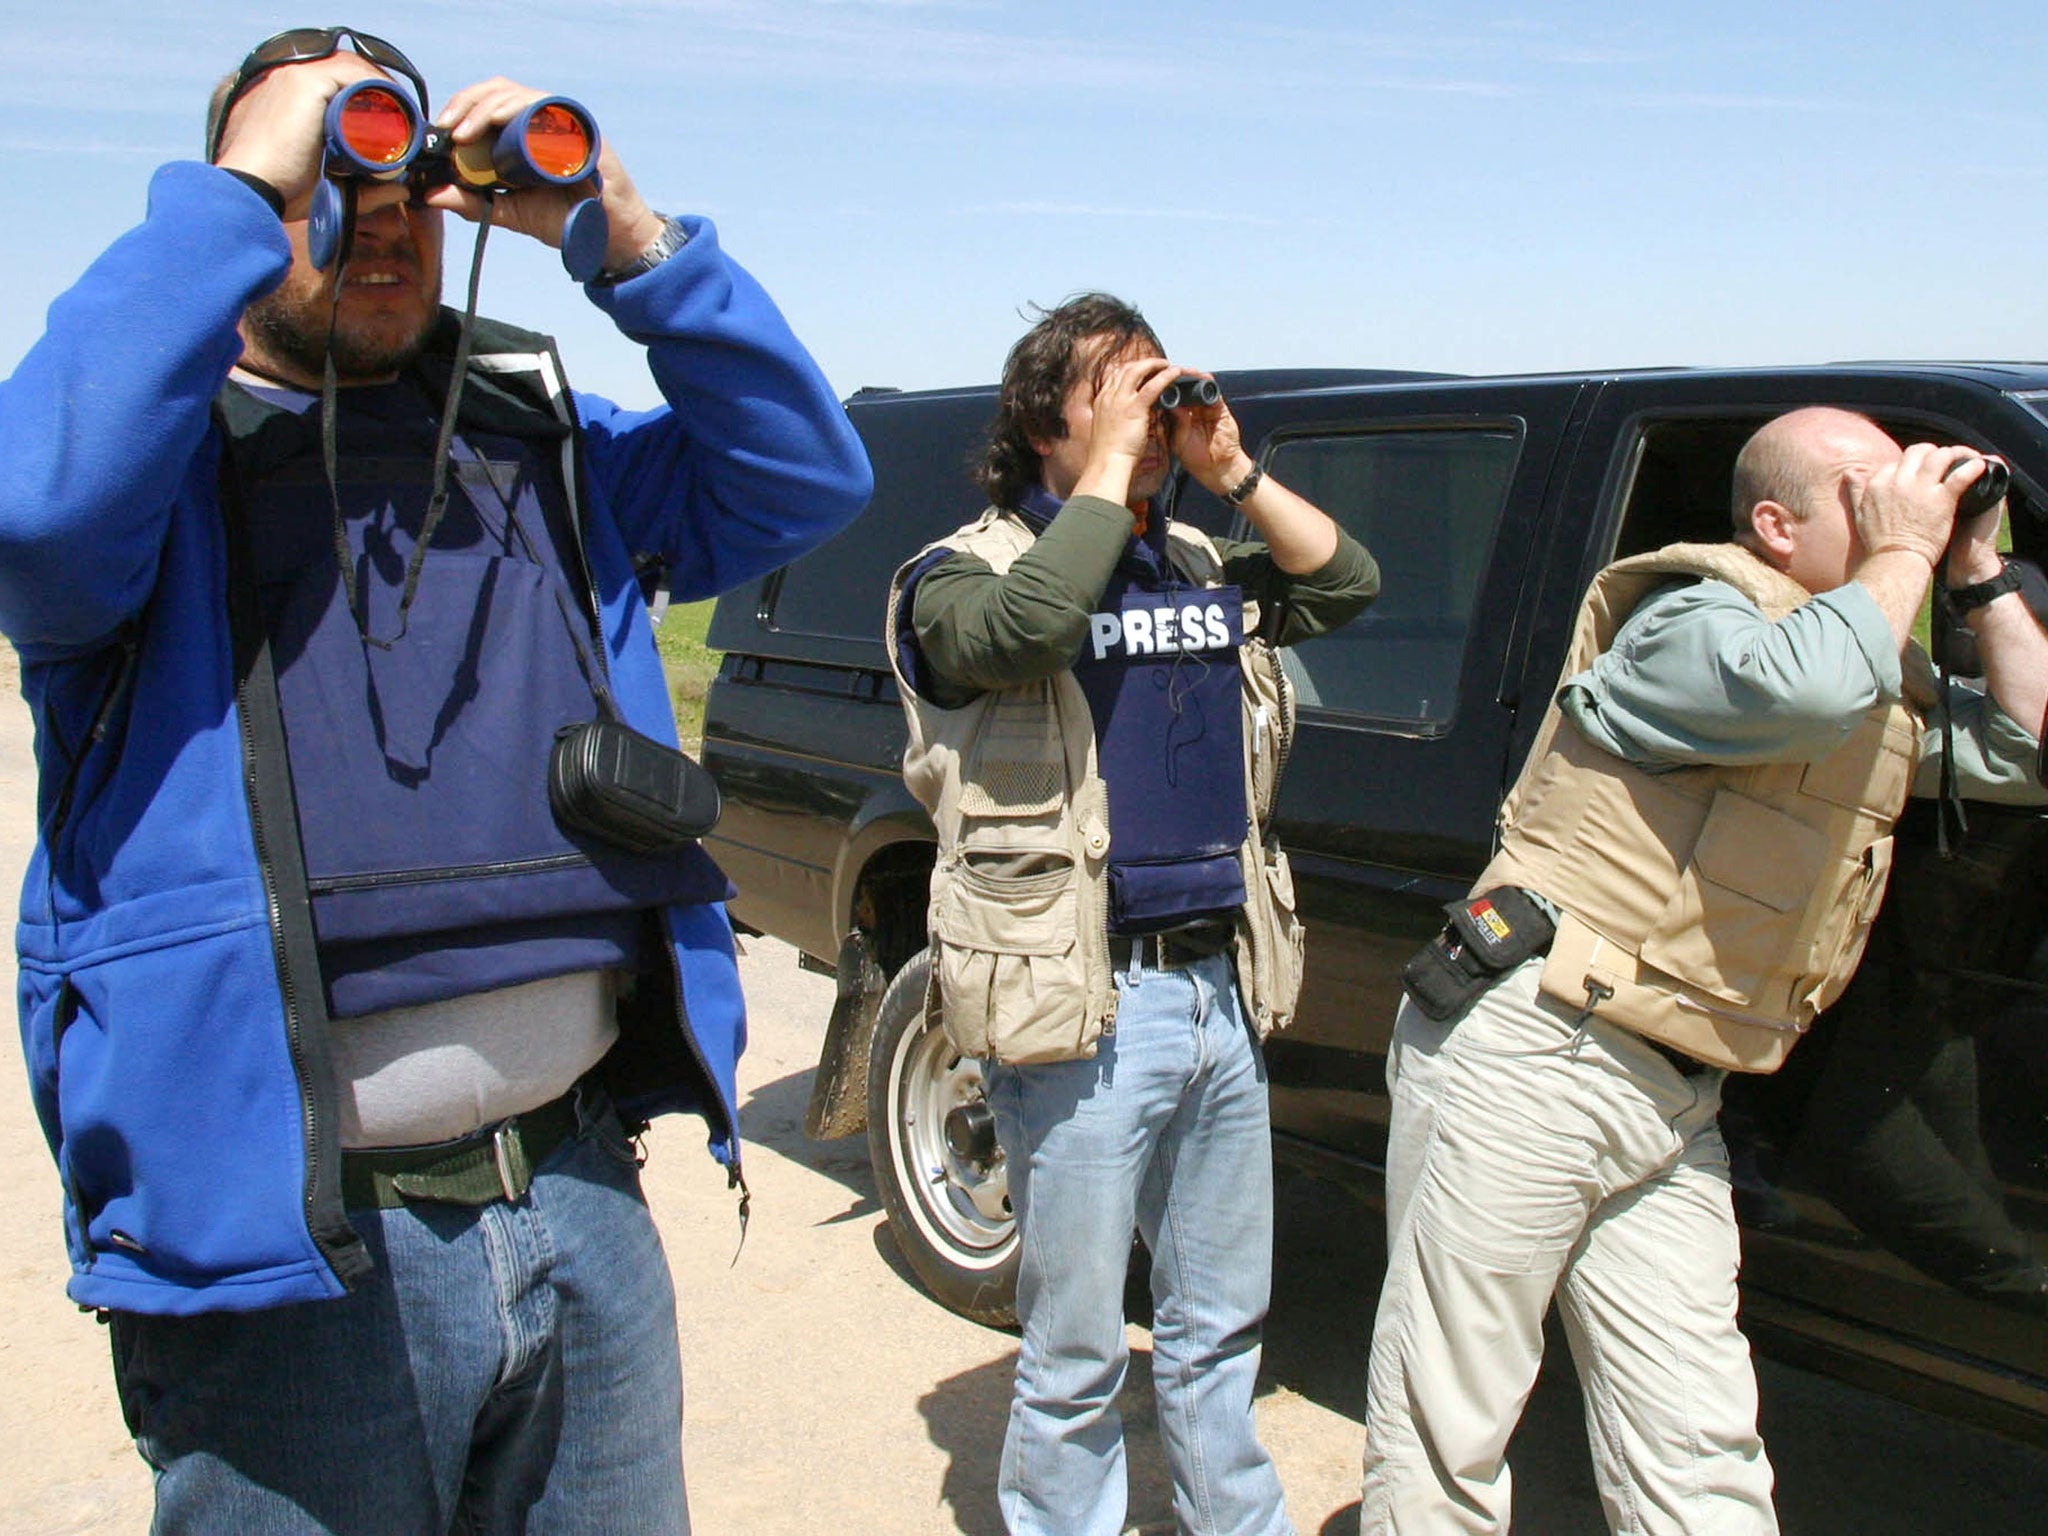 Media watch: journalists in Iraq in 2003, when being embedded led to restrictions in reporting